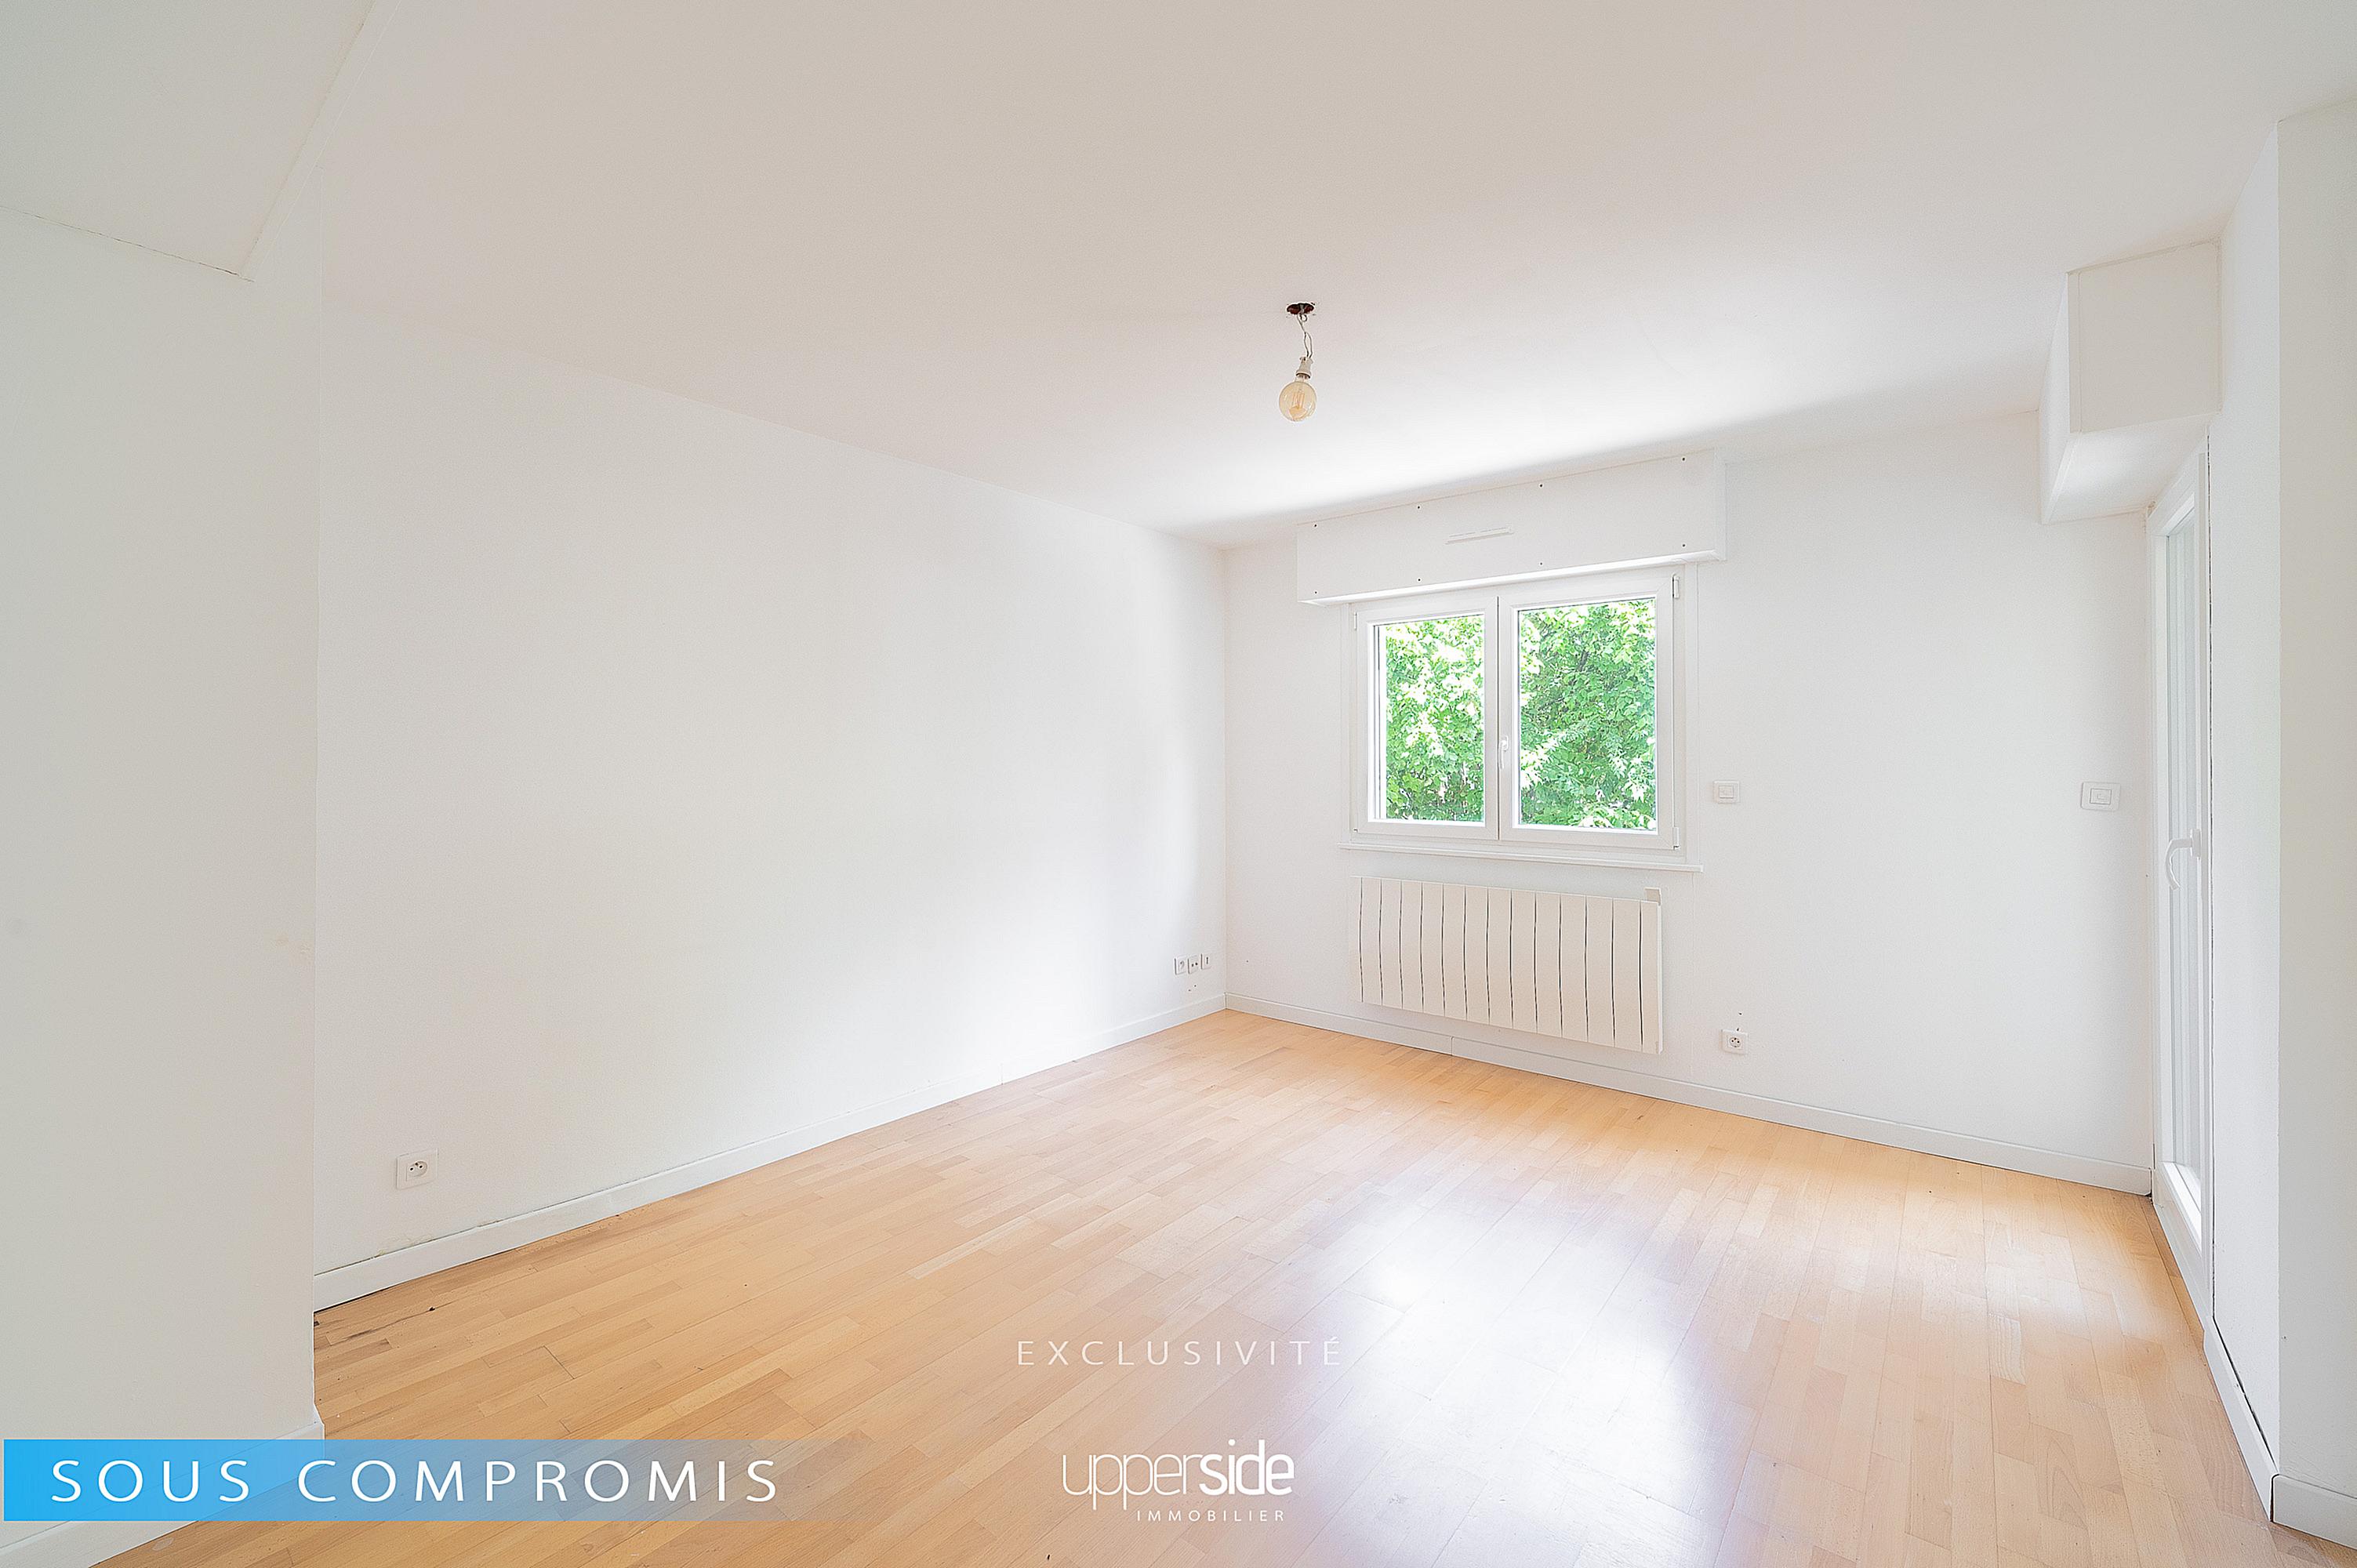 Upperside_immo_MAYA_appartement_xavier_freiss_illkirch_sejour_sous_compromis-concentrate